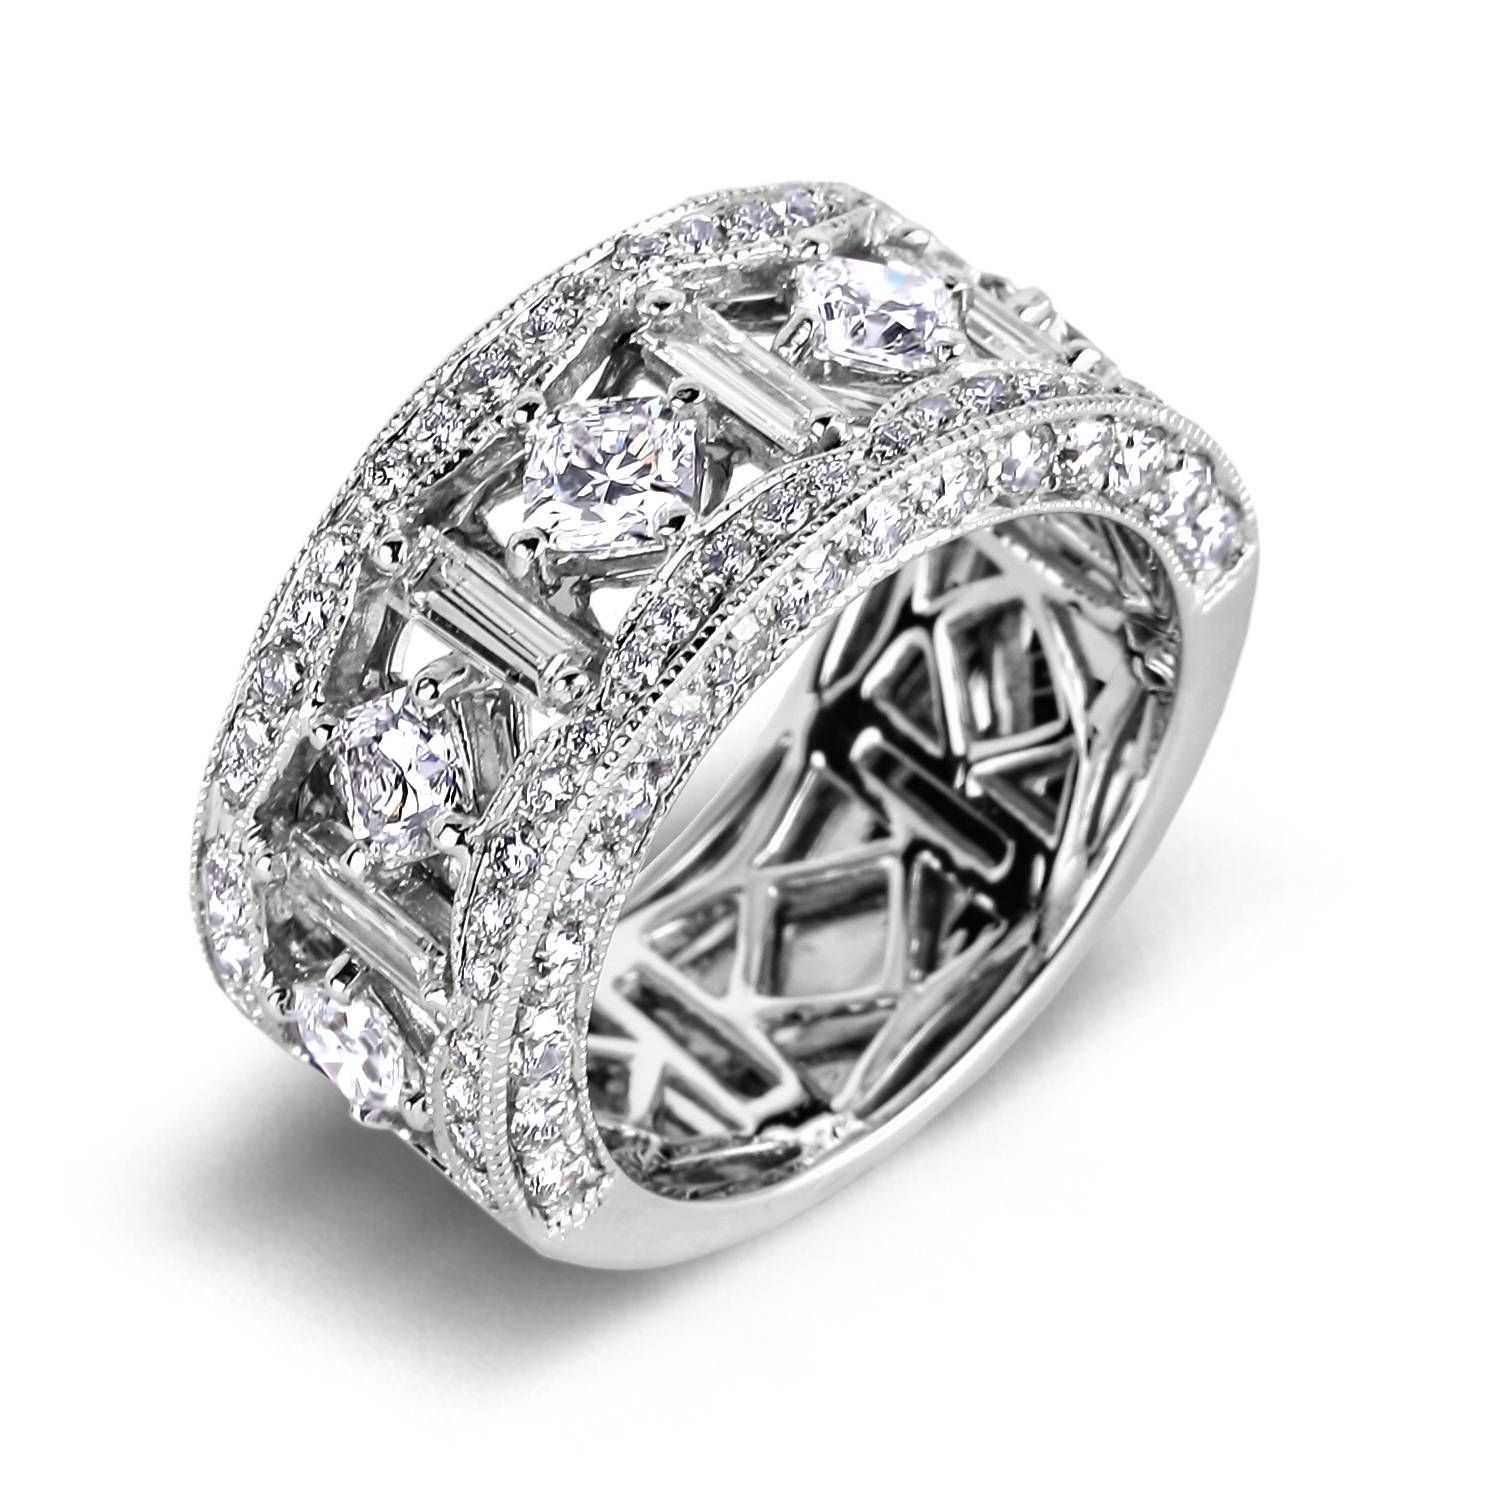 17+ Images About 10 Year Anniversary Rings On Pinterest | White For Most Recent 10 Year Anniversary Rings For Her (View 5 of 15)